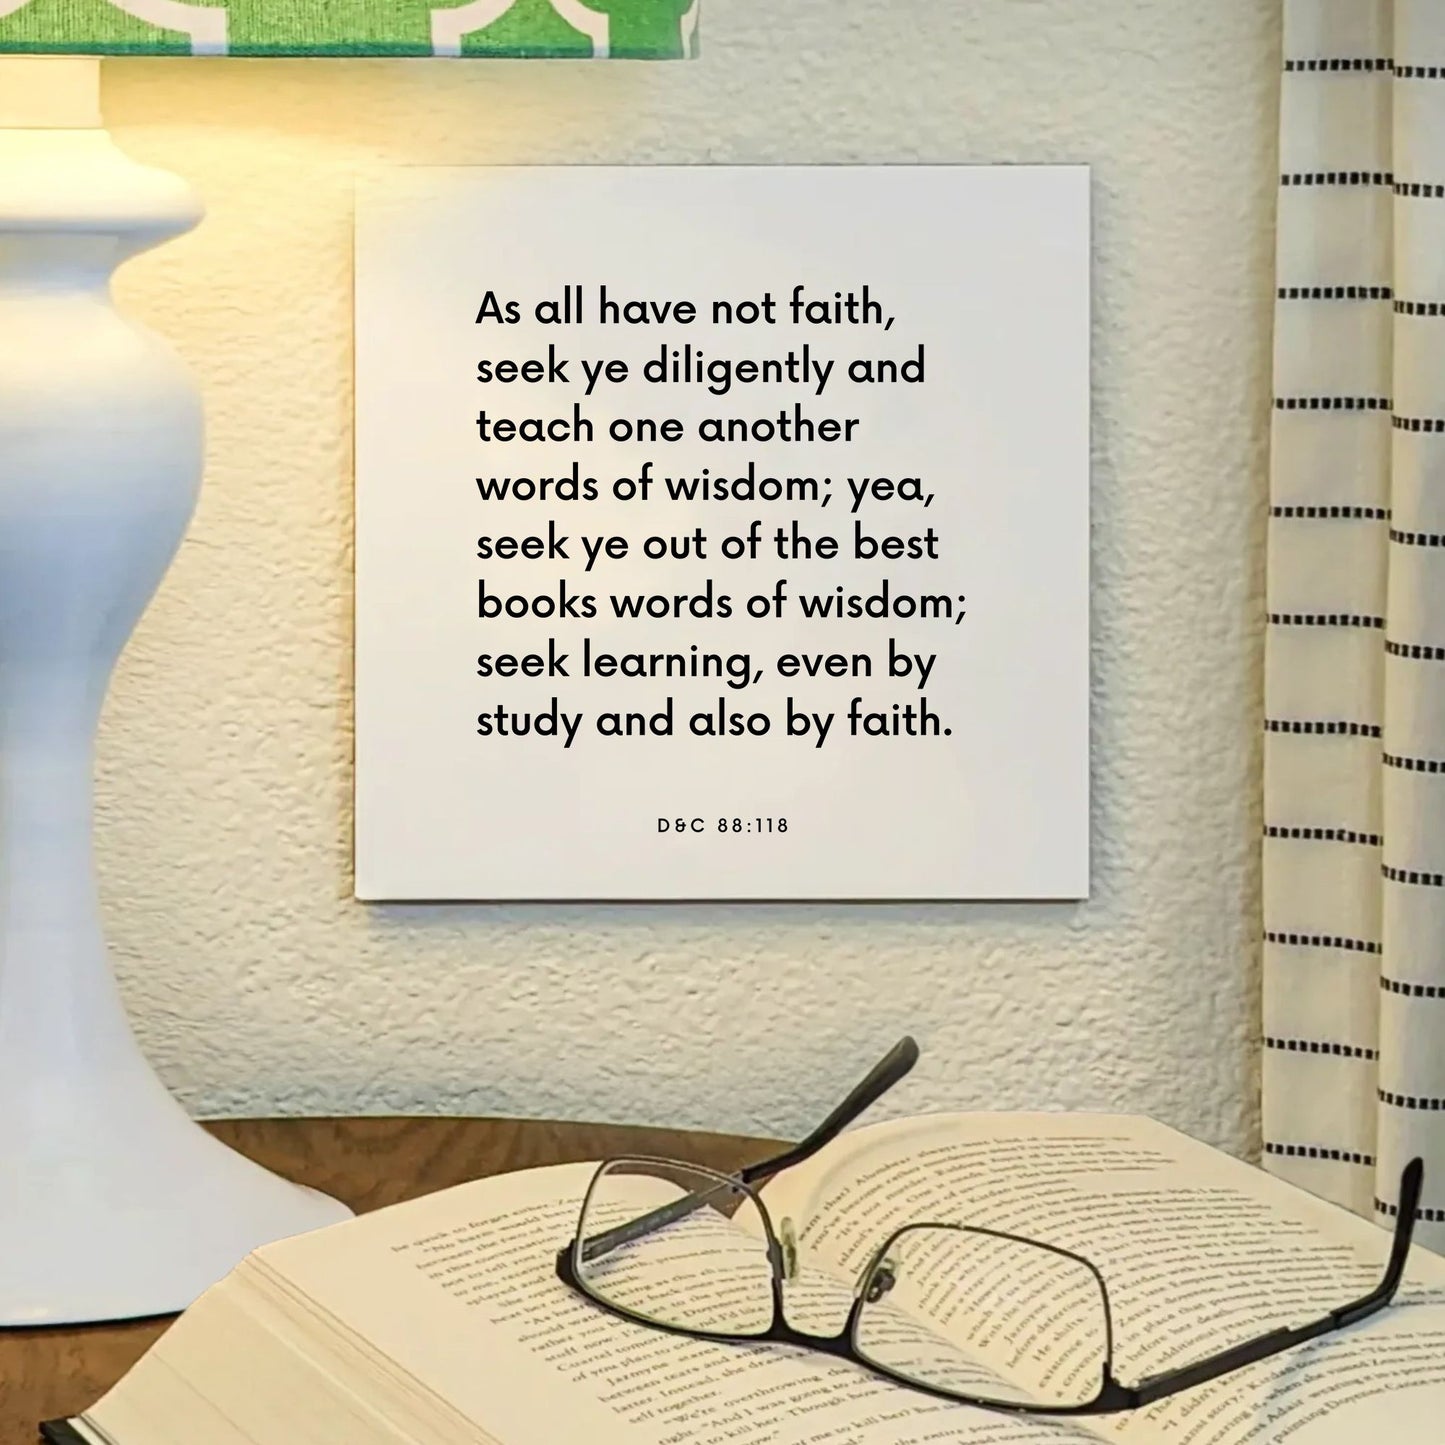 Lamp mouting of the scripture tile for D&C 88:118 - "Seek learning, even by study and also by faith"